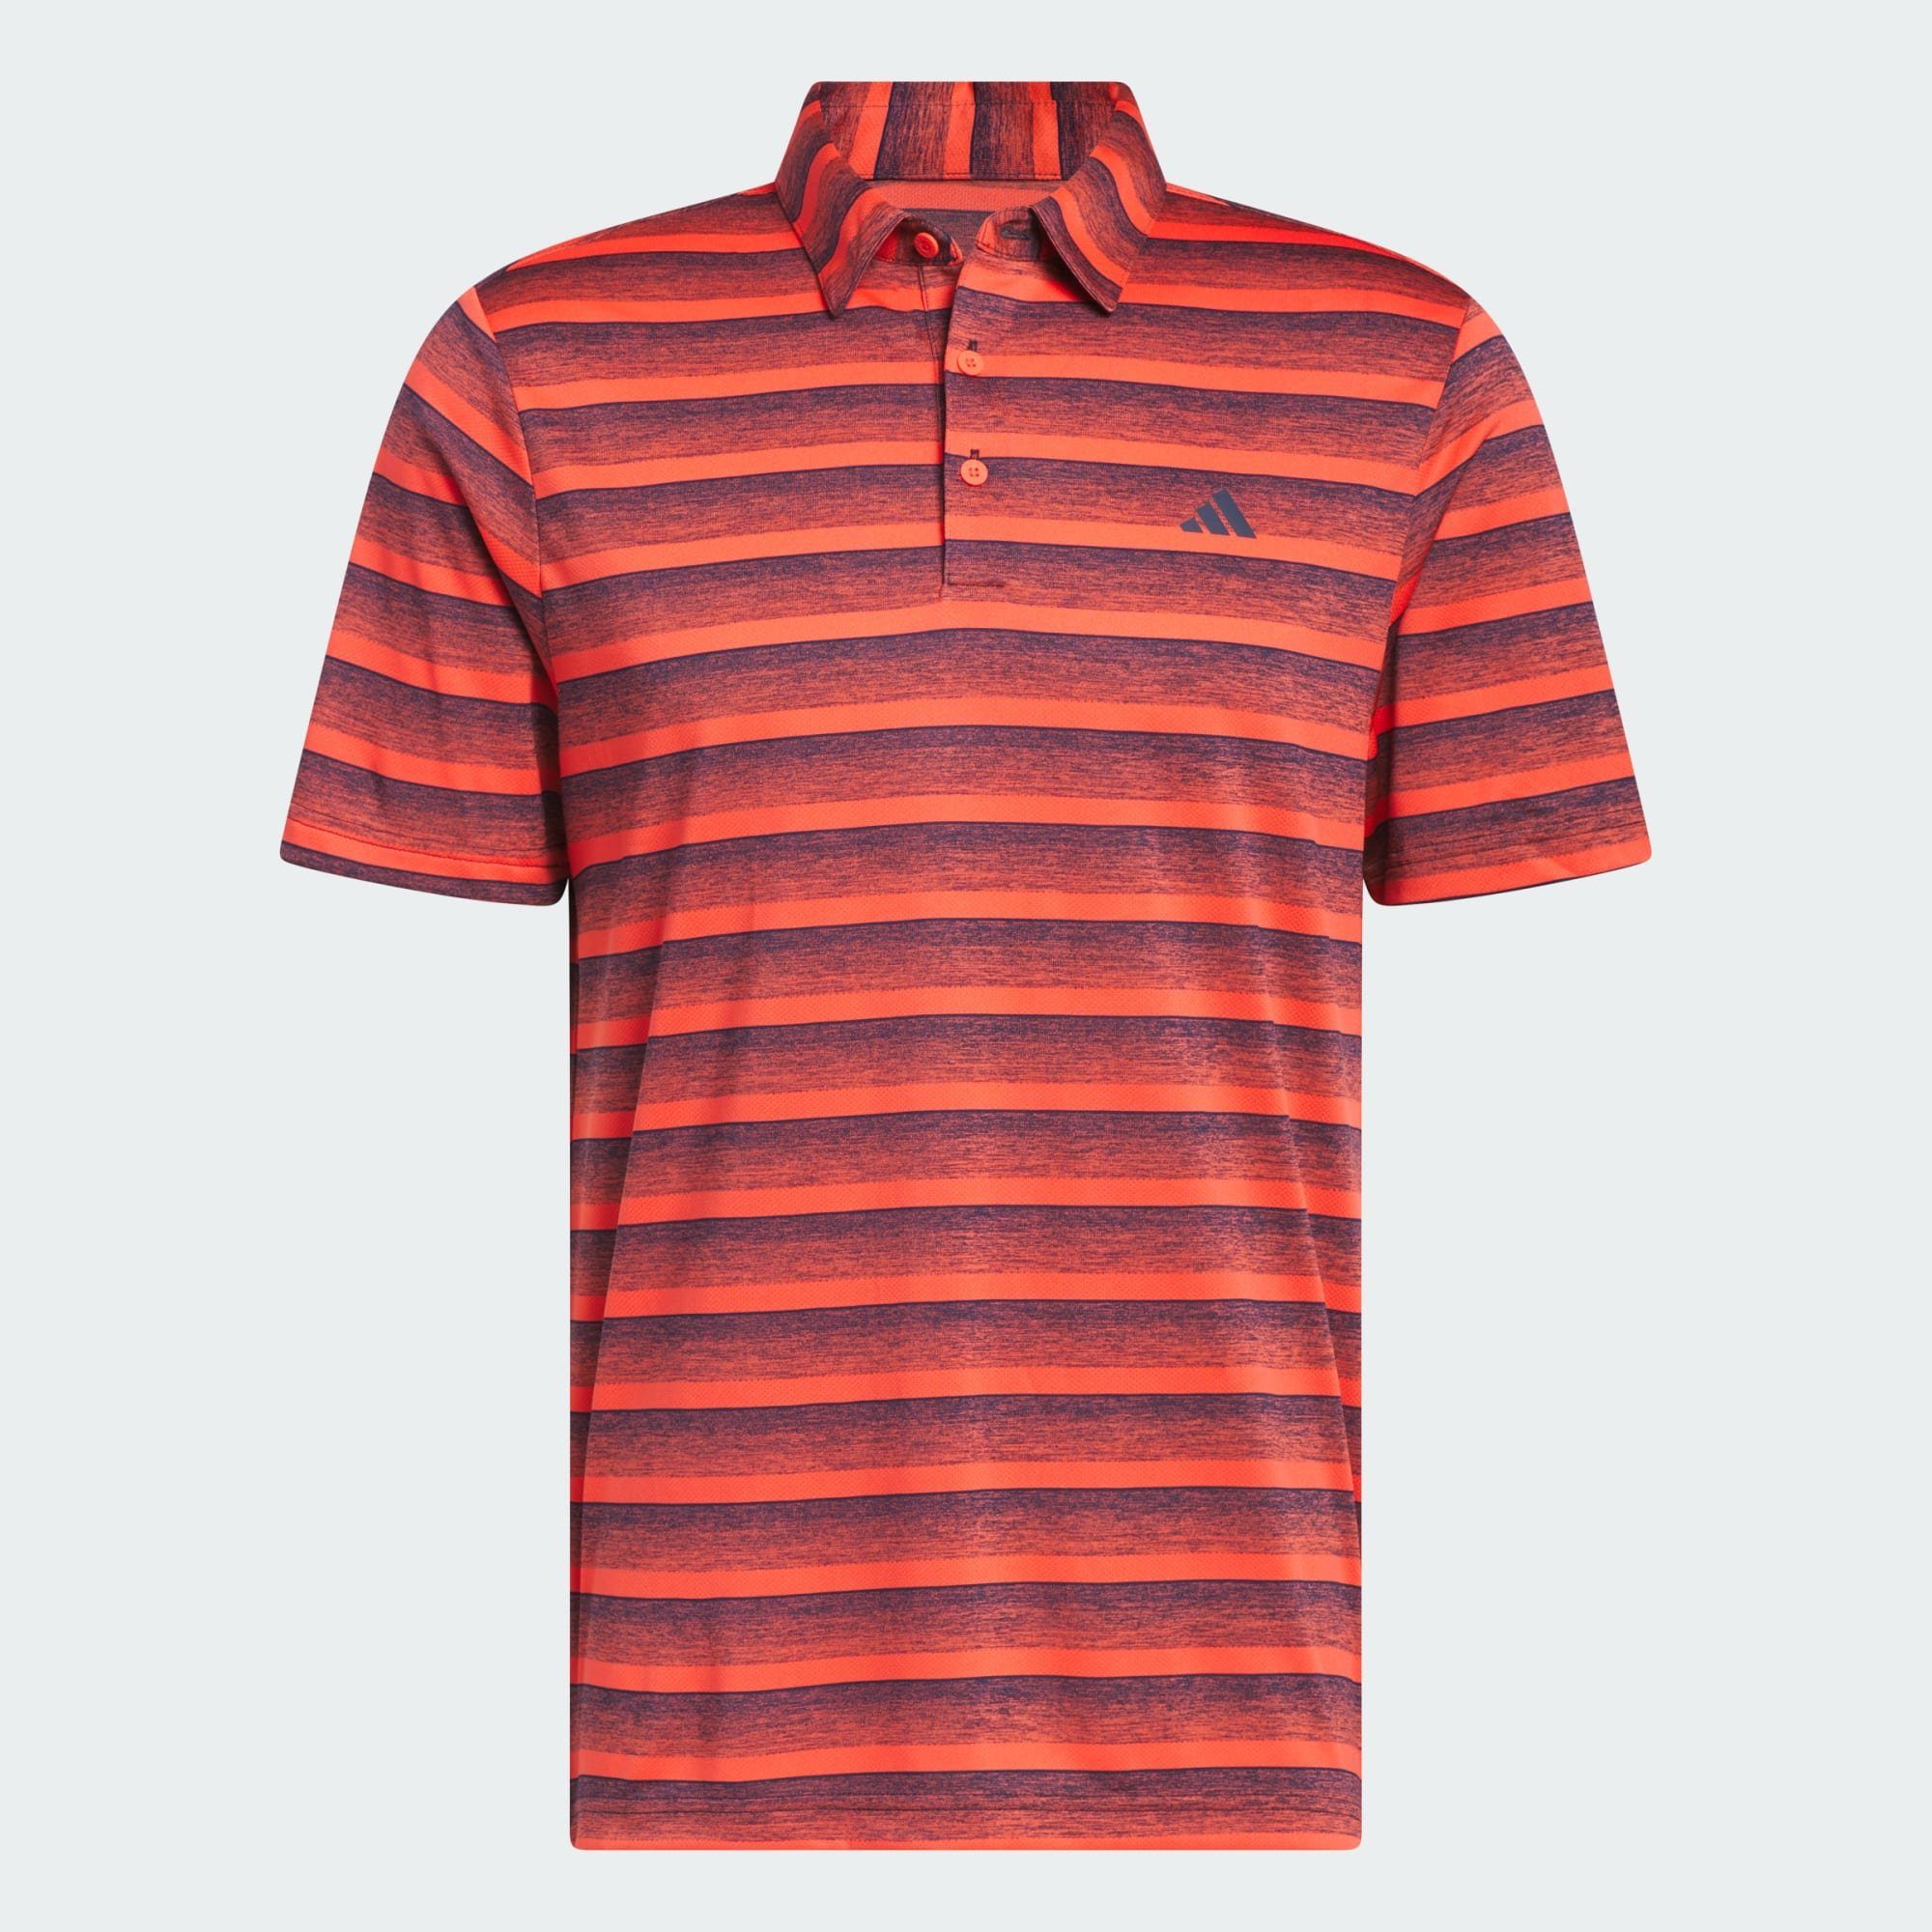 adidas Funktionsshirt Collegiate Bright Red POLOSHIRT Performance / STRIPE Navy TWO-COLOR